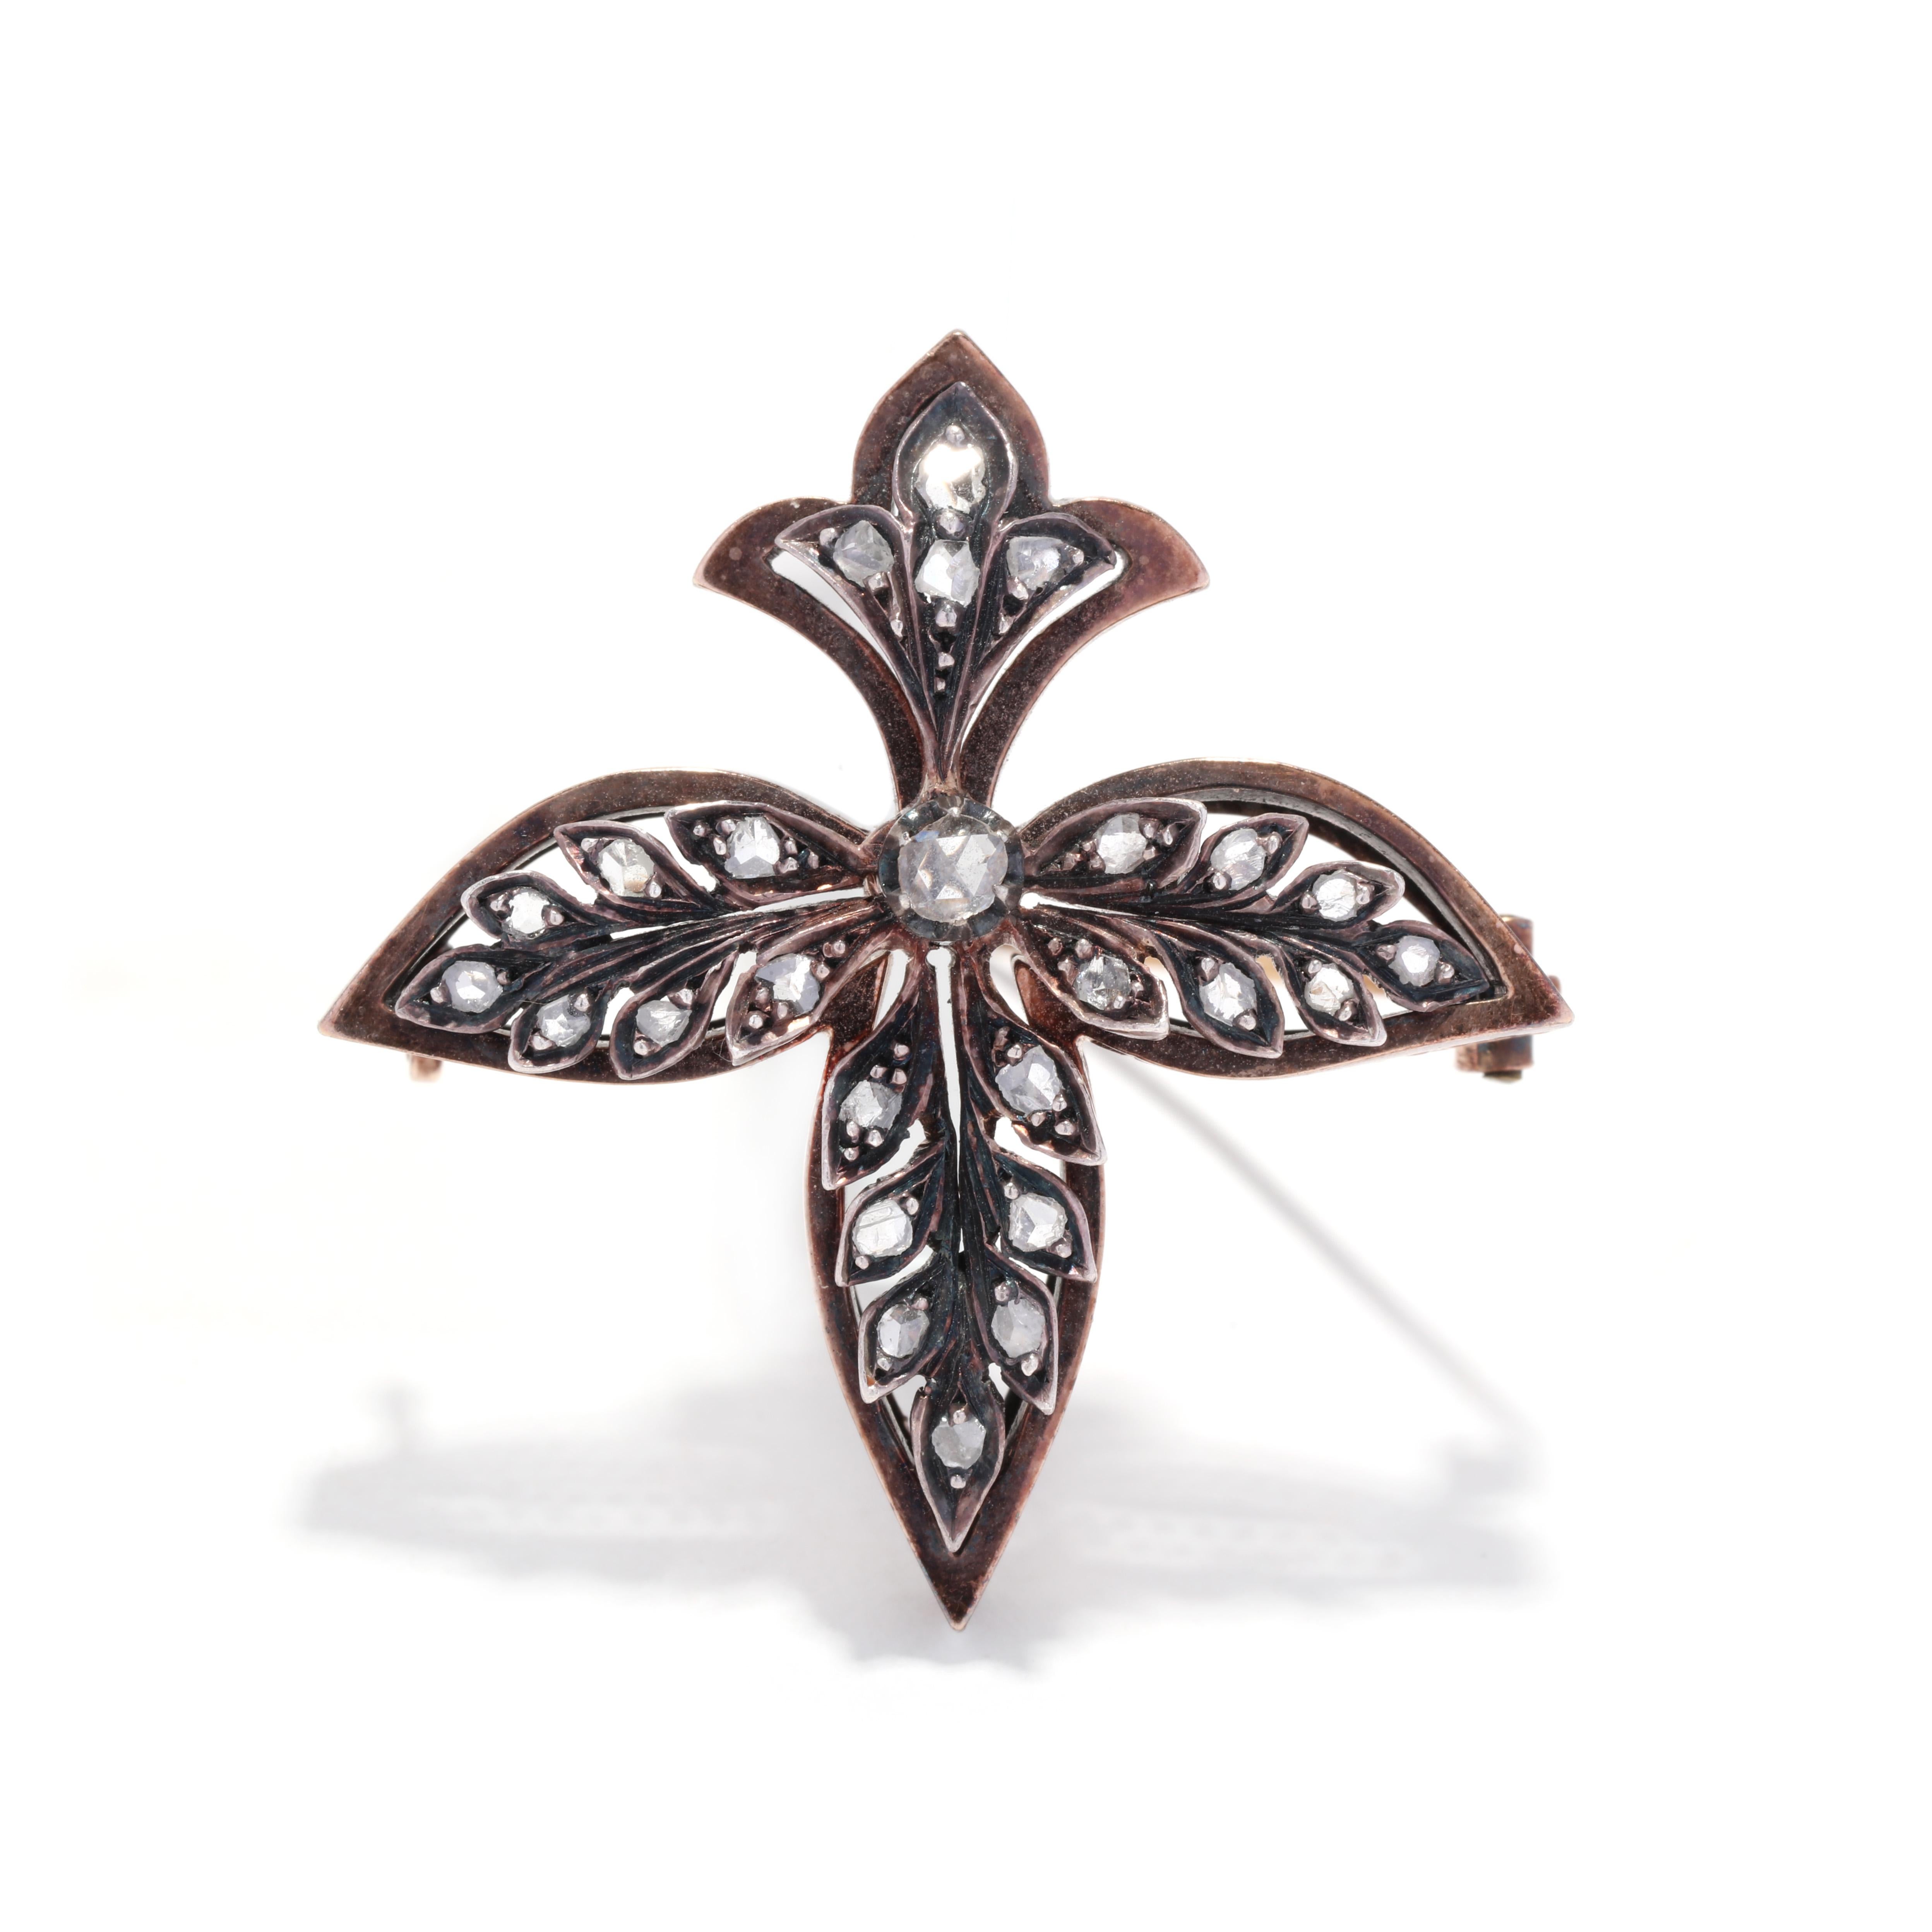 An antique French diamond fleur de lis brooch. This Victorian brooch features a silver topped gold design in a fleur de lis and leaf motif set with old rose cut diamonds weighing approximately .30 total carats and with a pin stem clasp.

Stones:
-